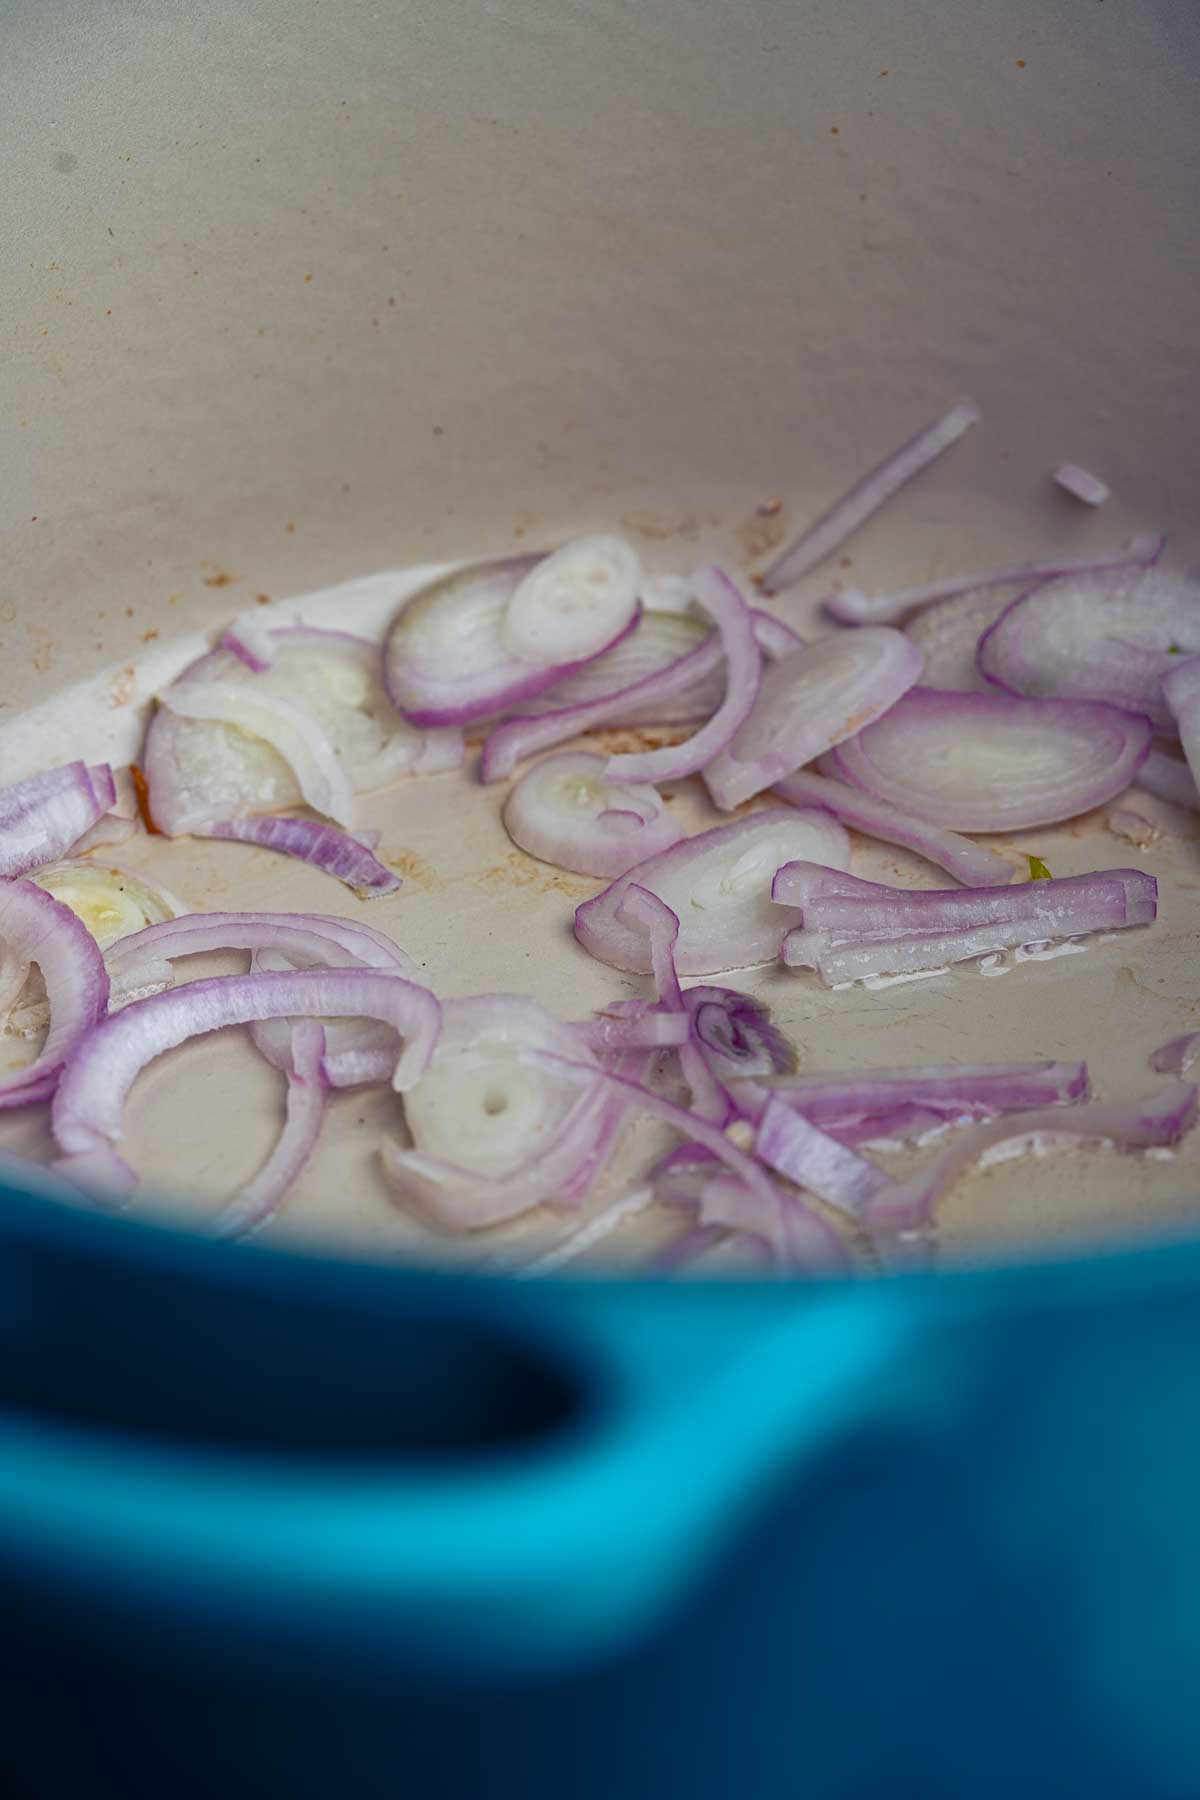 A pot of shallots being cooked in a blue pot.